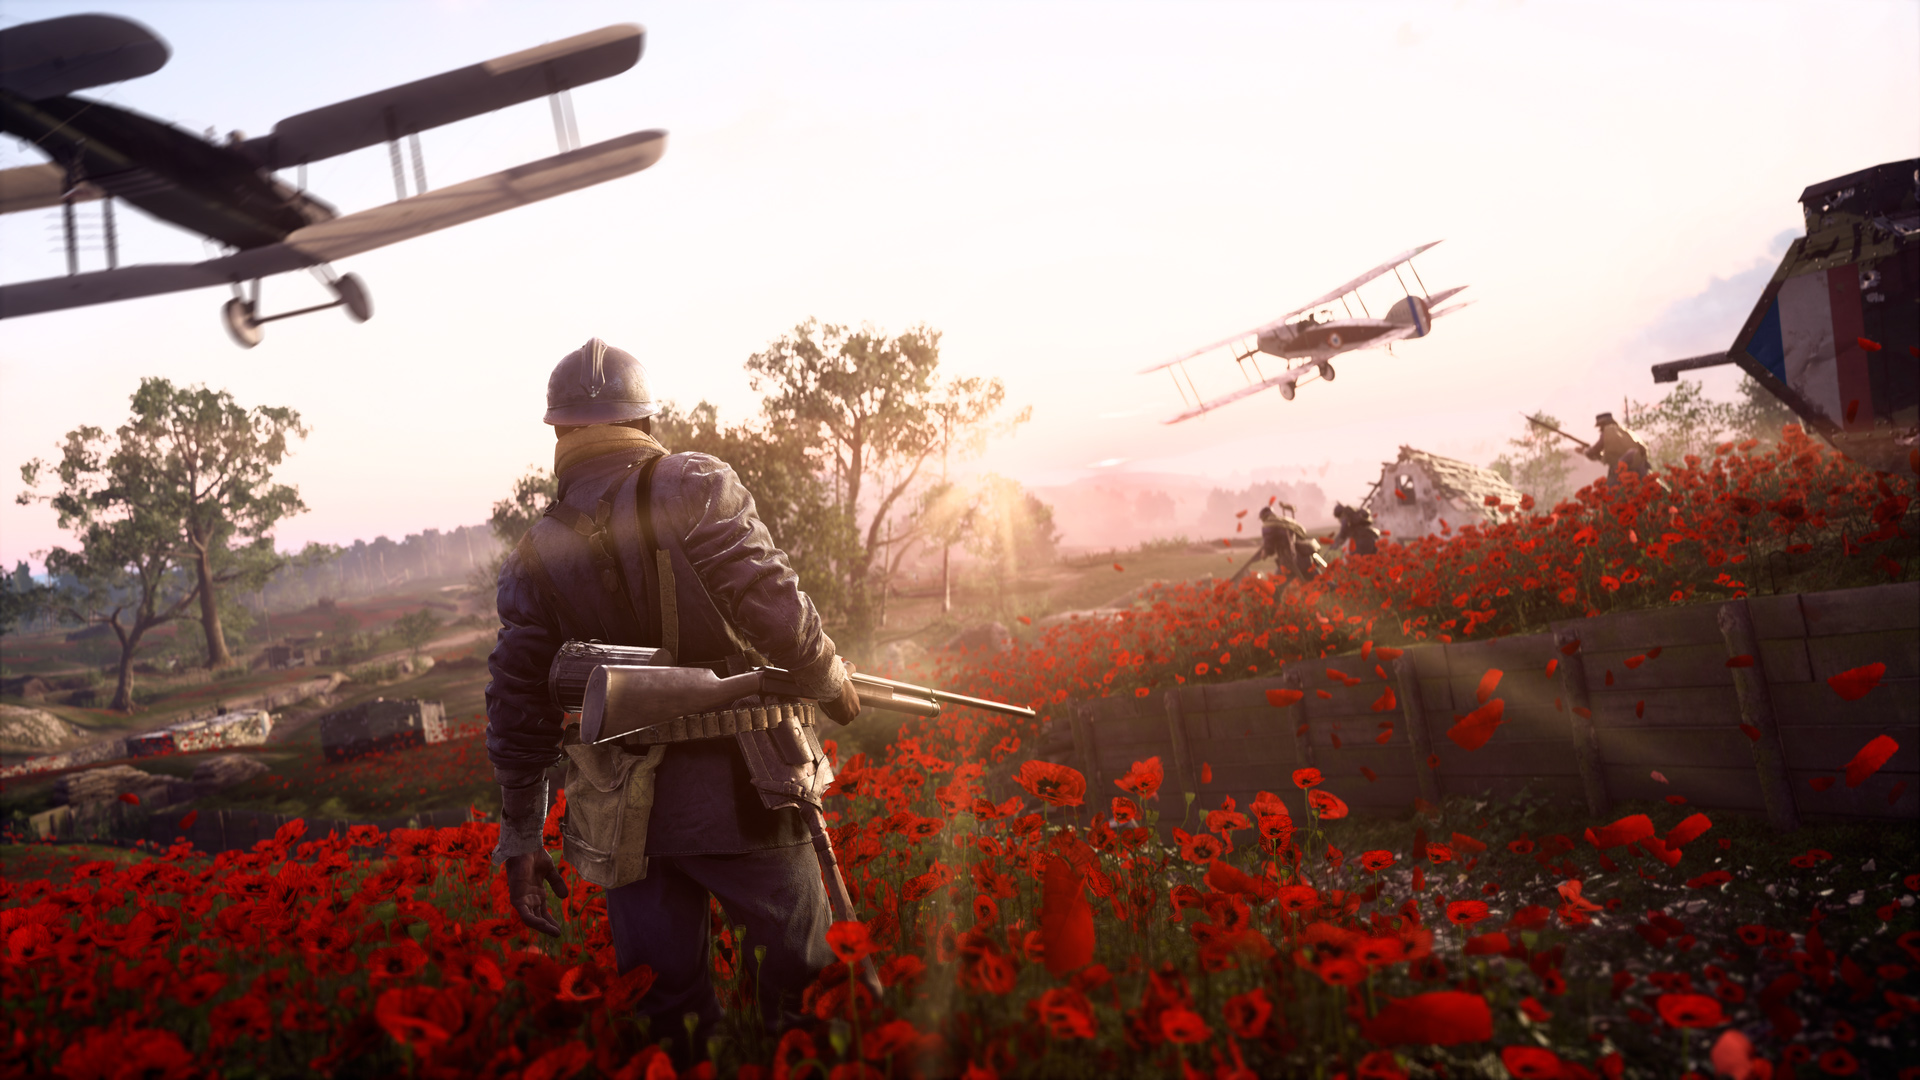 Battlefield 1 will be free to play on PC and Xbox One this weekend